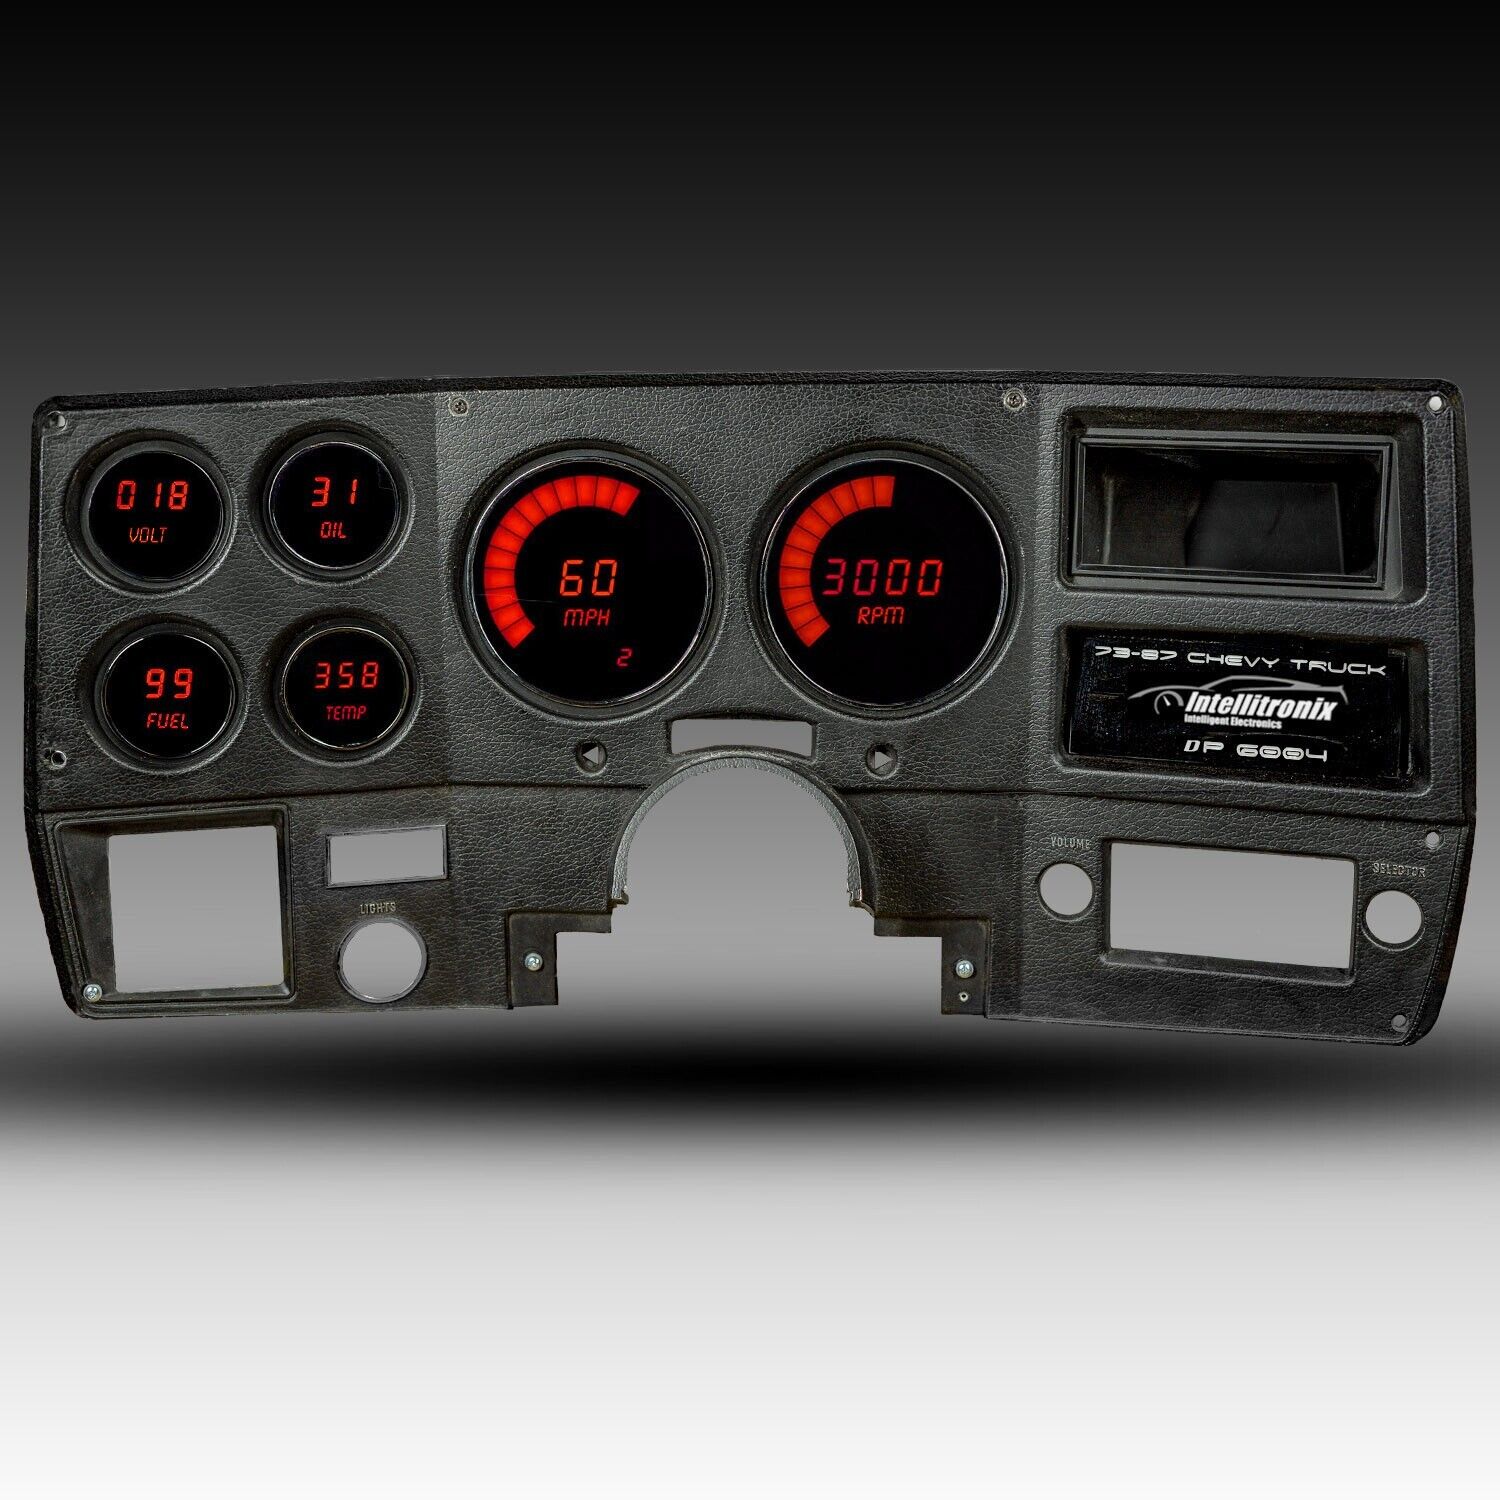 1973-1987 Chevy Truck Digital Dash RED LED Intellitronix DP6004R Made In USA